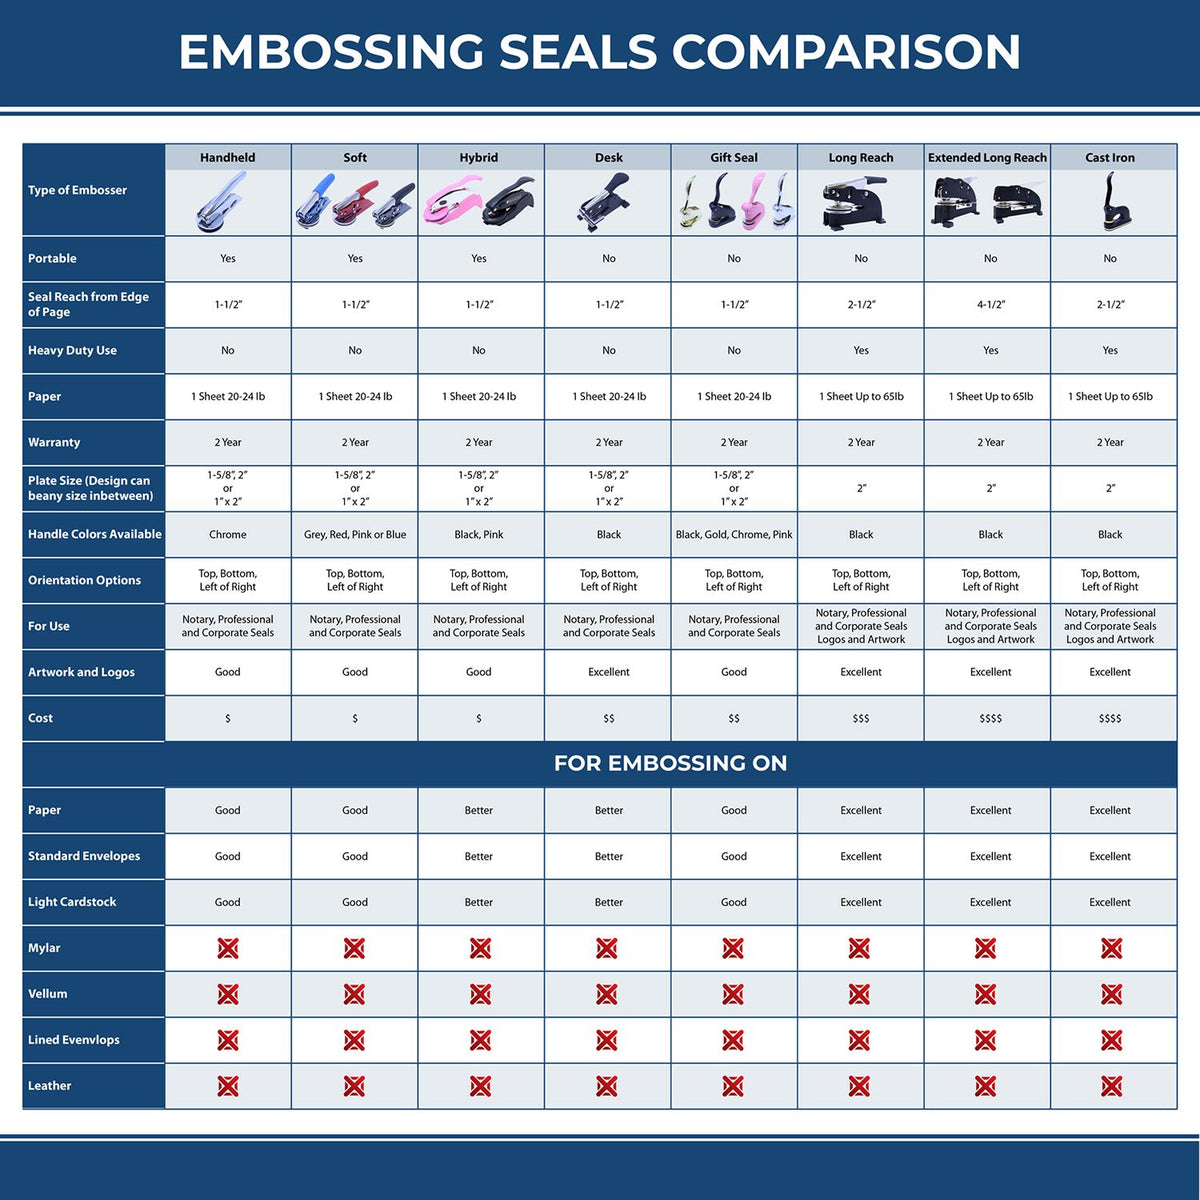 A comparison chart for the different types of mount models available for the Hybrid Ohio Land Surveyor Seal